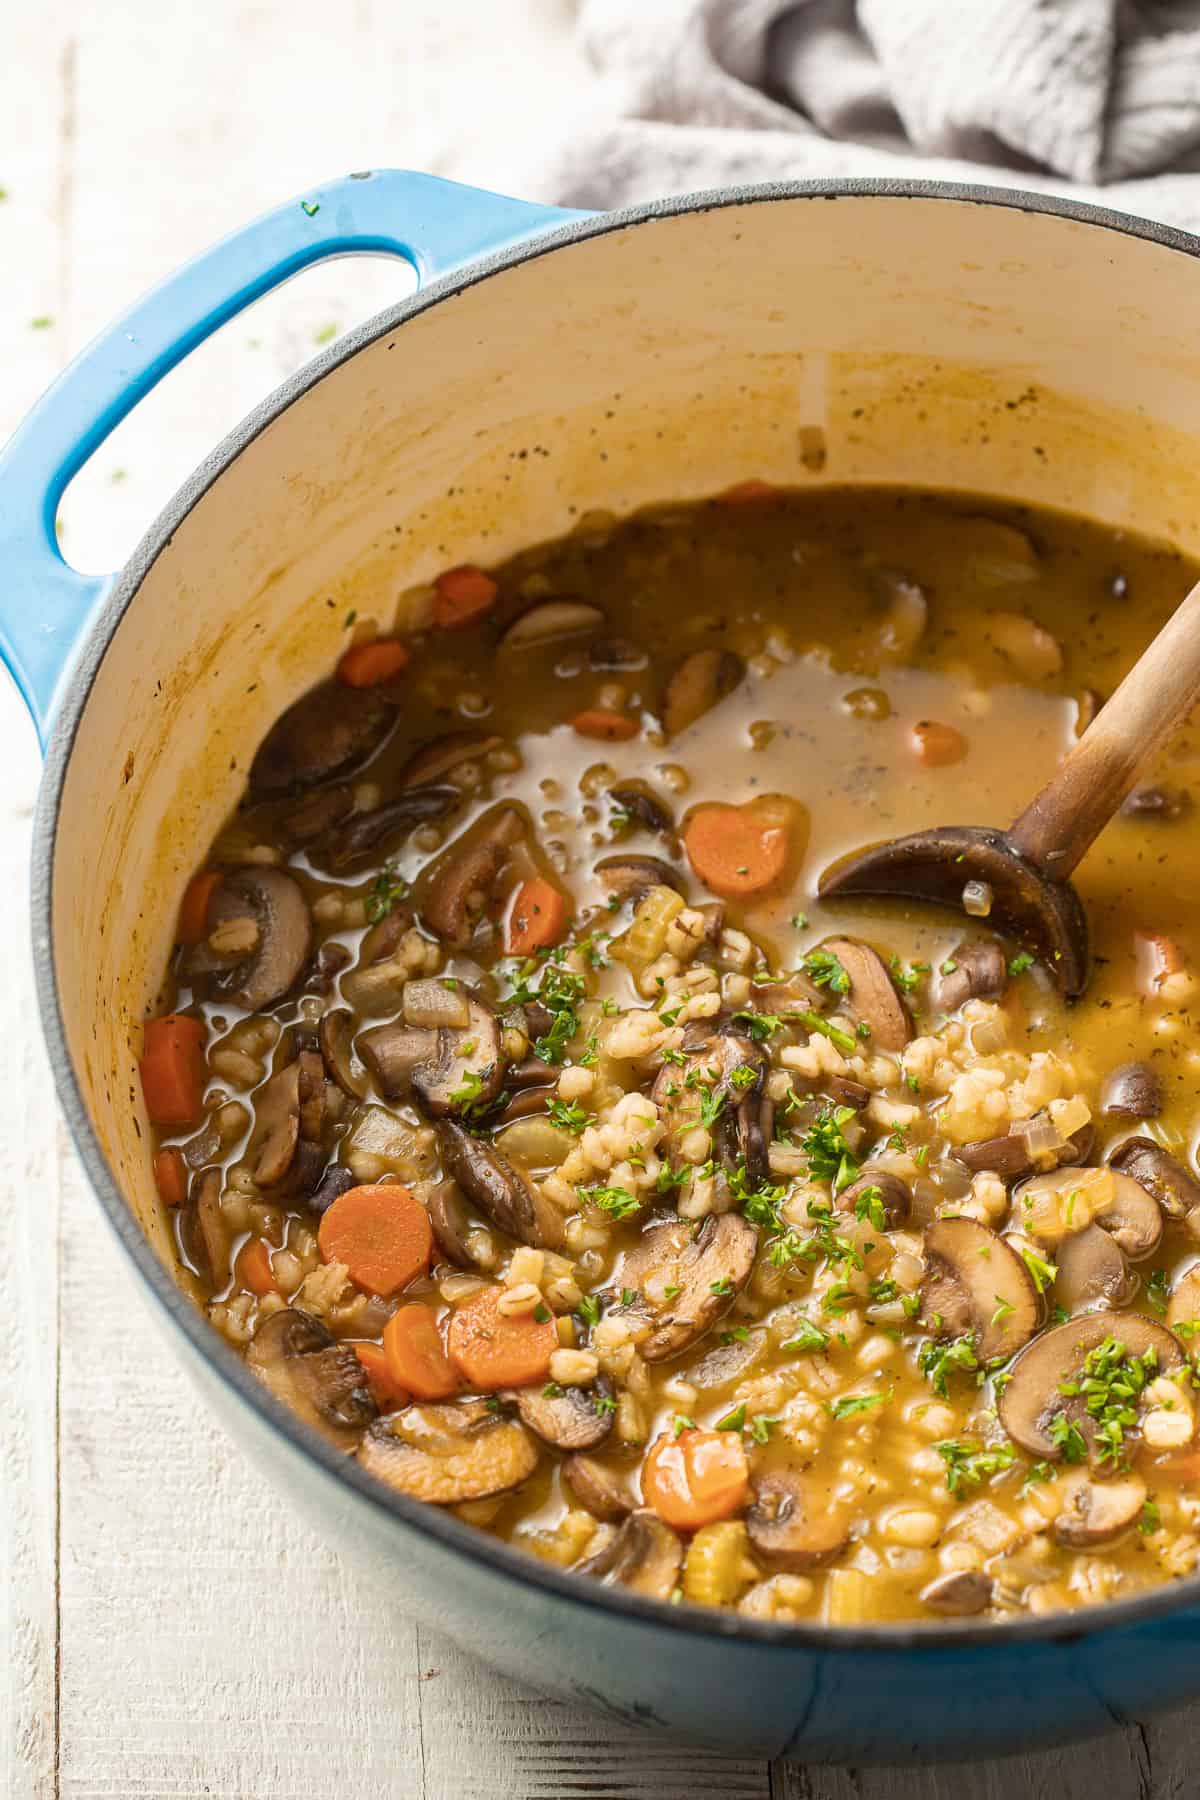 Pot of Mushroom Barley Soup with a wooden spoon.